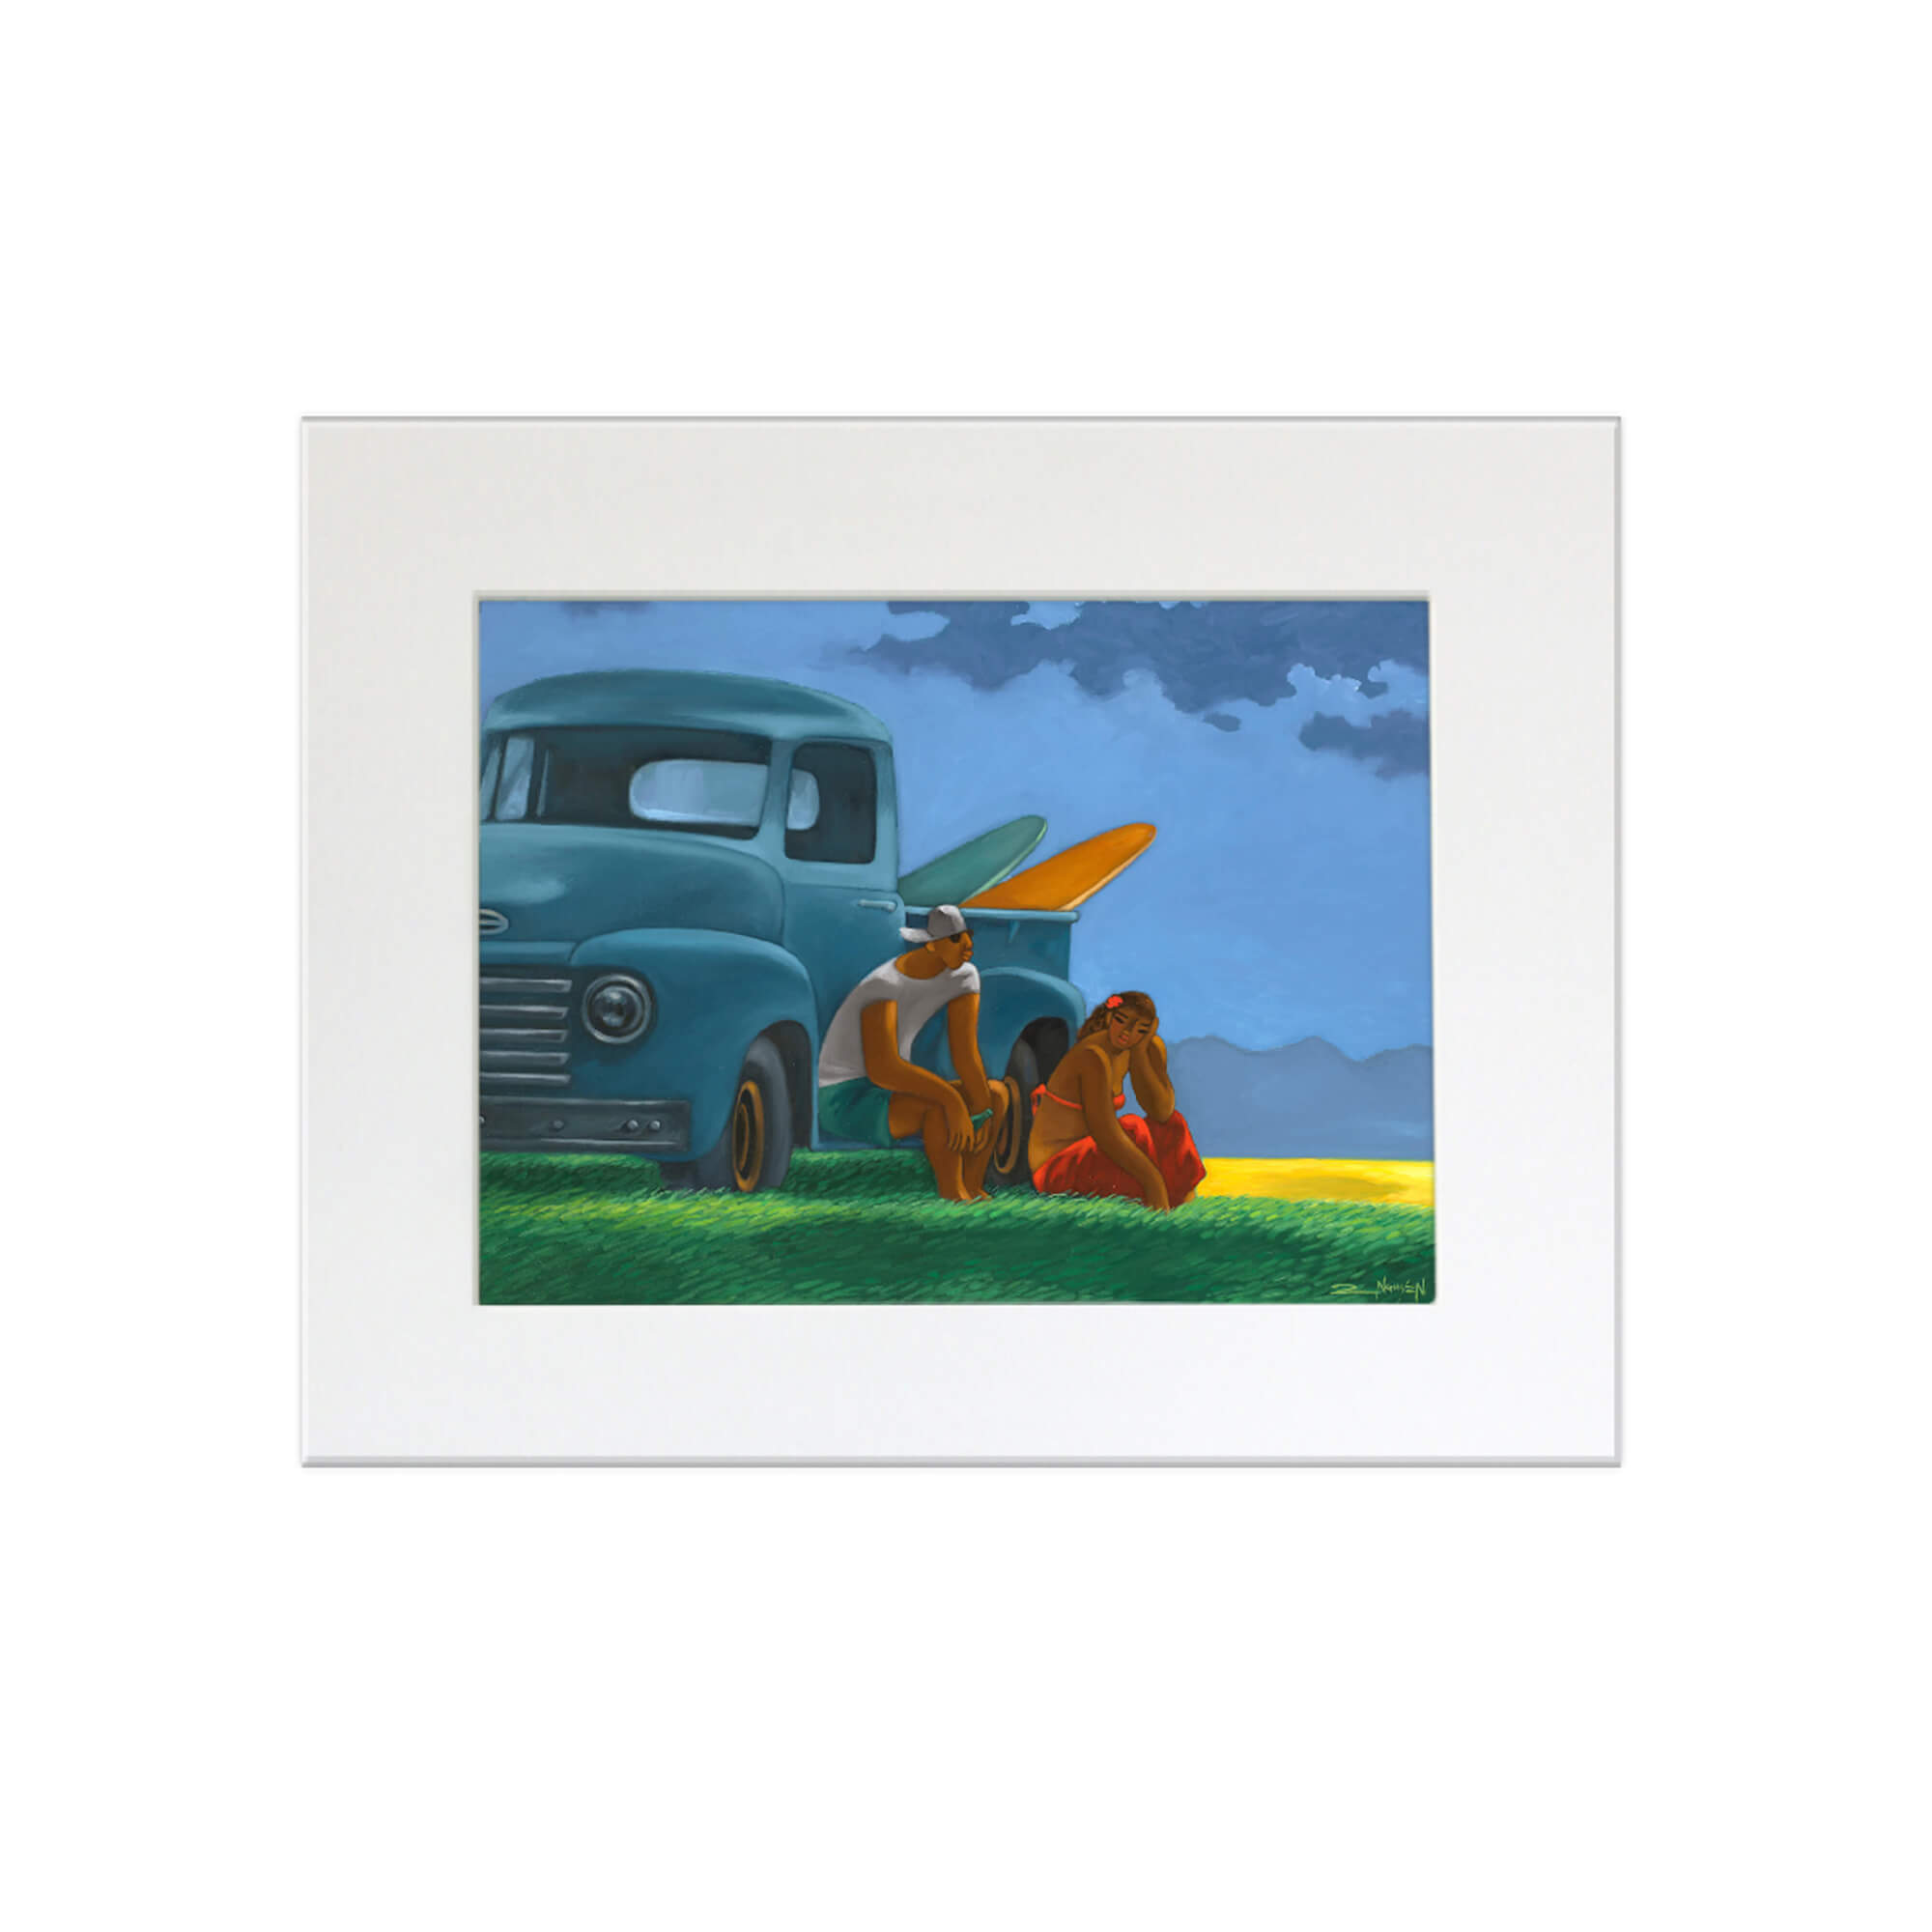 A matted art print of a couple with their surfboards and  vintage truck by Hawaii artist Tim Nguyen